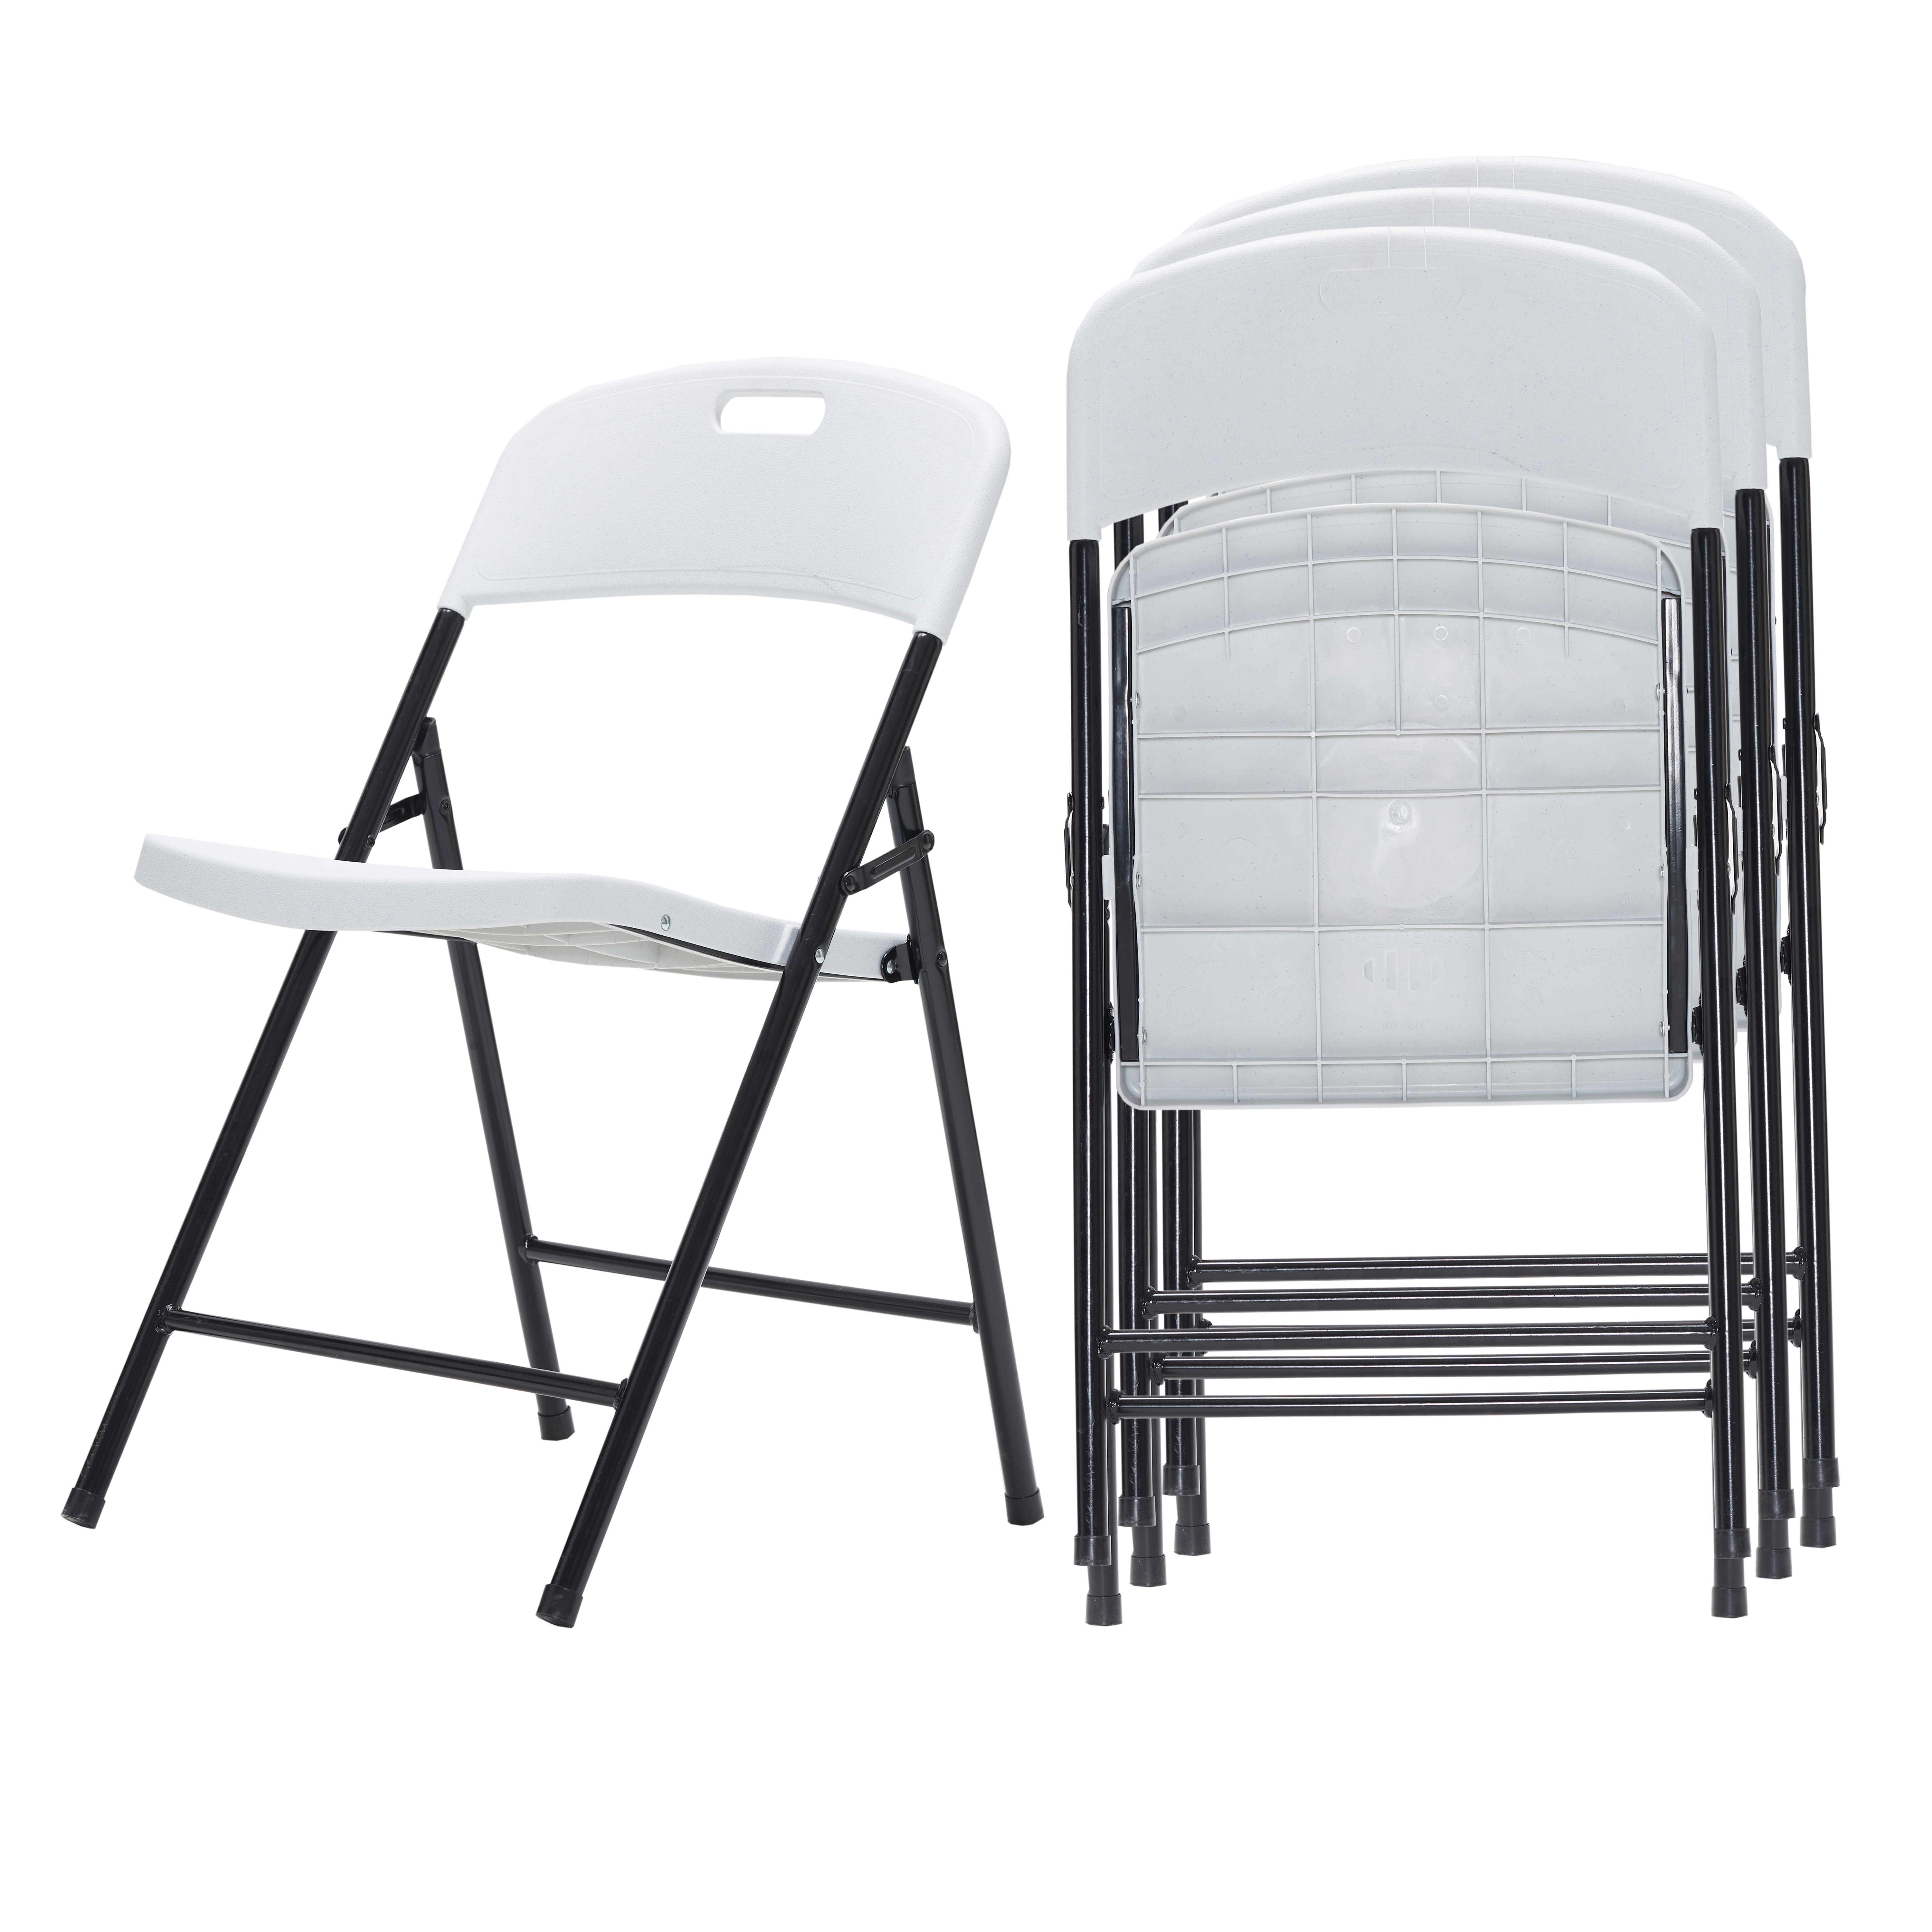 4 Pack Portable Plastic Folding Chairs, Sturdy Design, Indoor/Outdoor Events, Perfect for Camping/Picnic/Tailgating/Party, Easy to Clean, White-Boyel Living